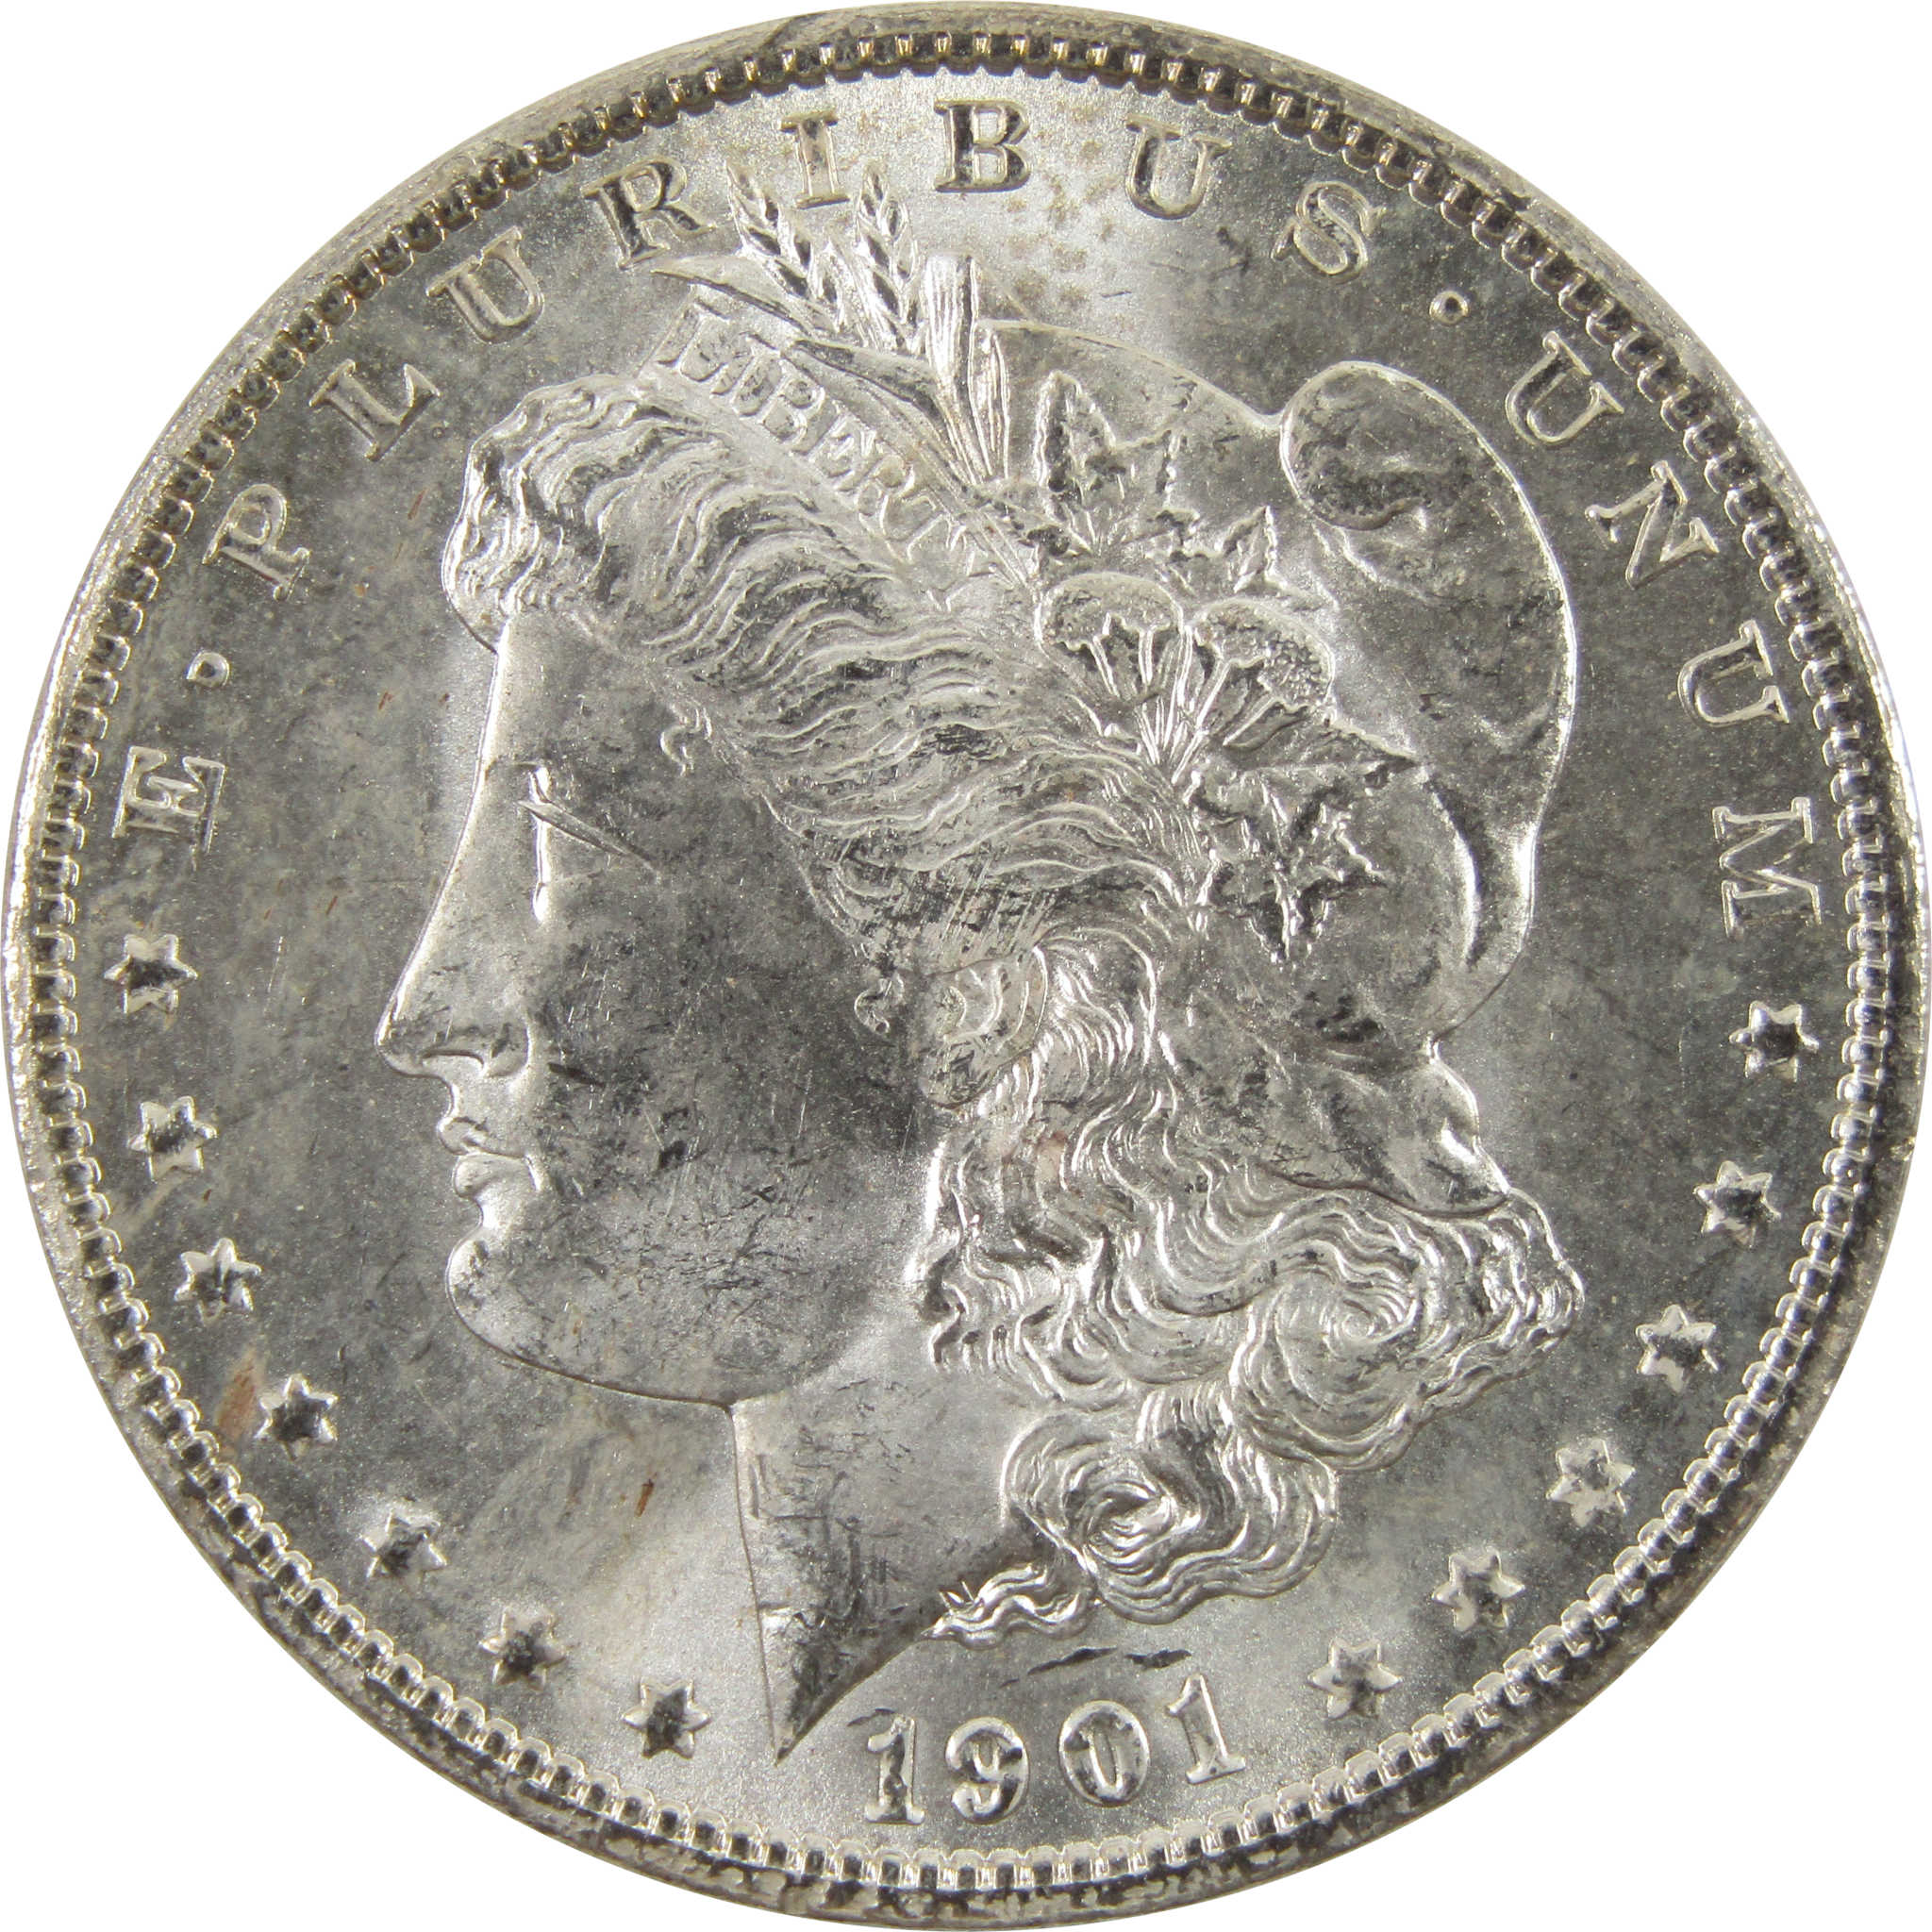 1901 O Morgan Dollar Uncirculated Details 90% Silver $1 SKU:I10463 - Morgan coin - Morgan silver dollar - Morgan silver dollar for sale - Profile Coins &amp; Collectibles